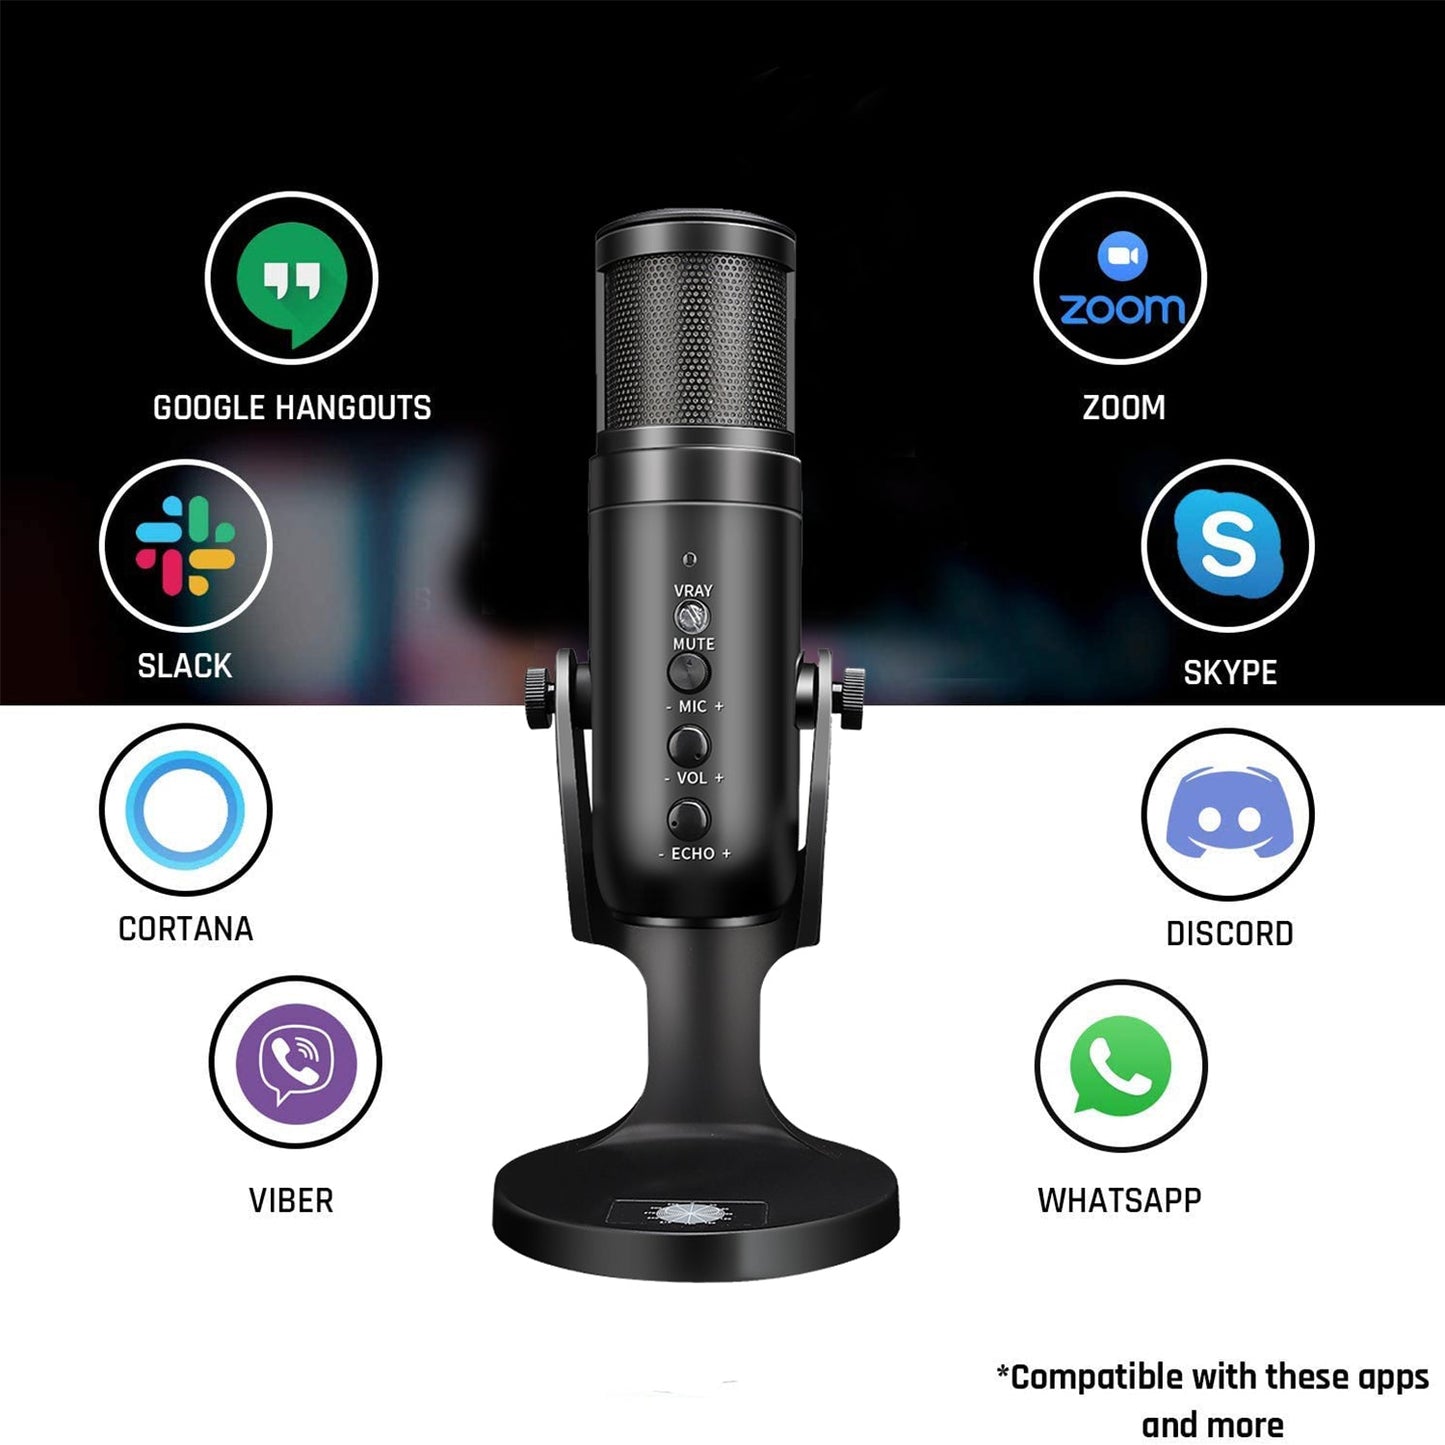 E-Lektron RGB Color Metal Condenser Microphone For Gaming Live Chat Sing Streaming on PC Laptop With USB Type-C Headphone Jack